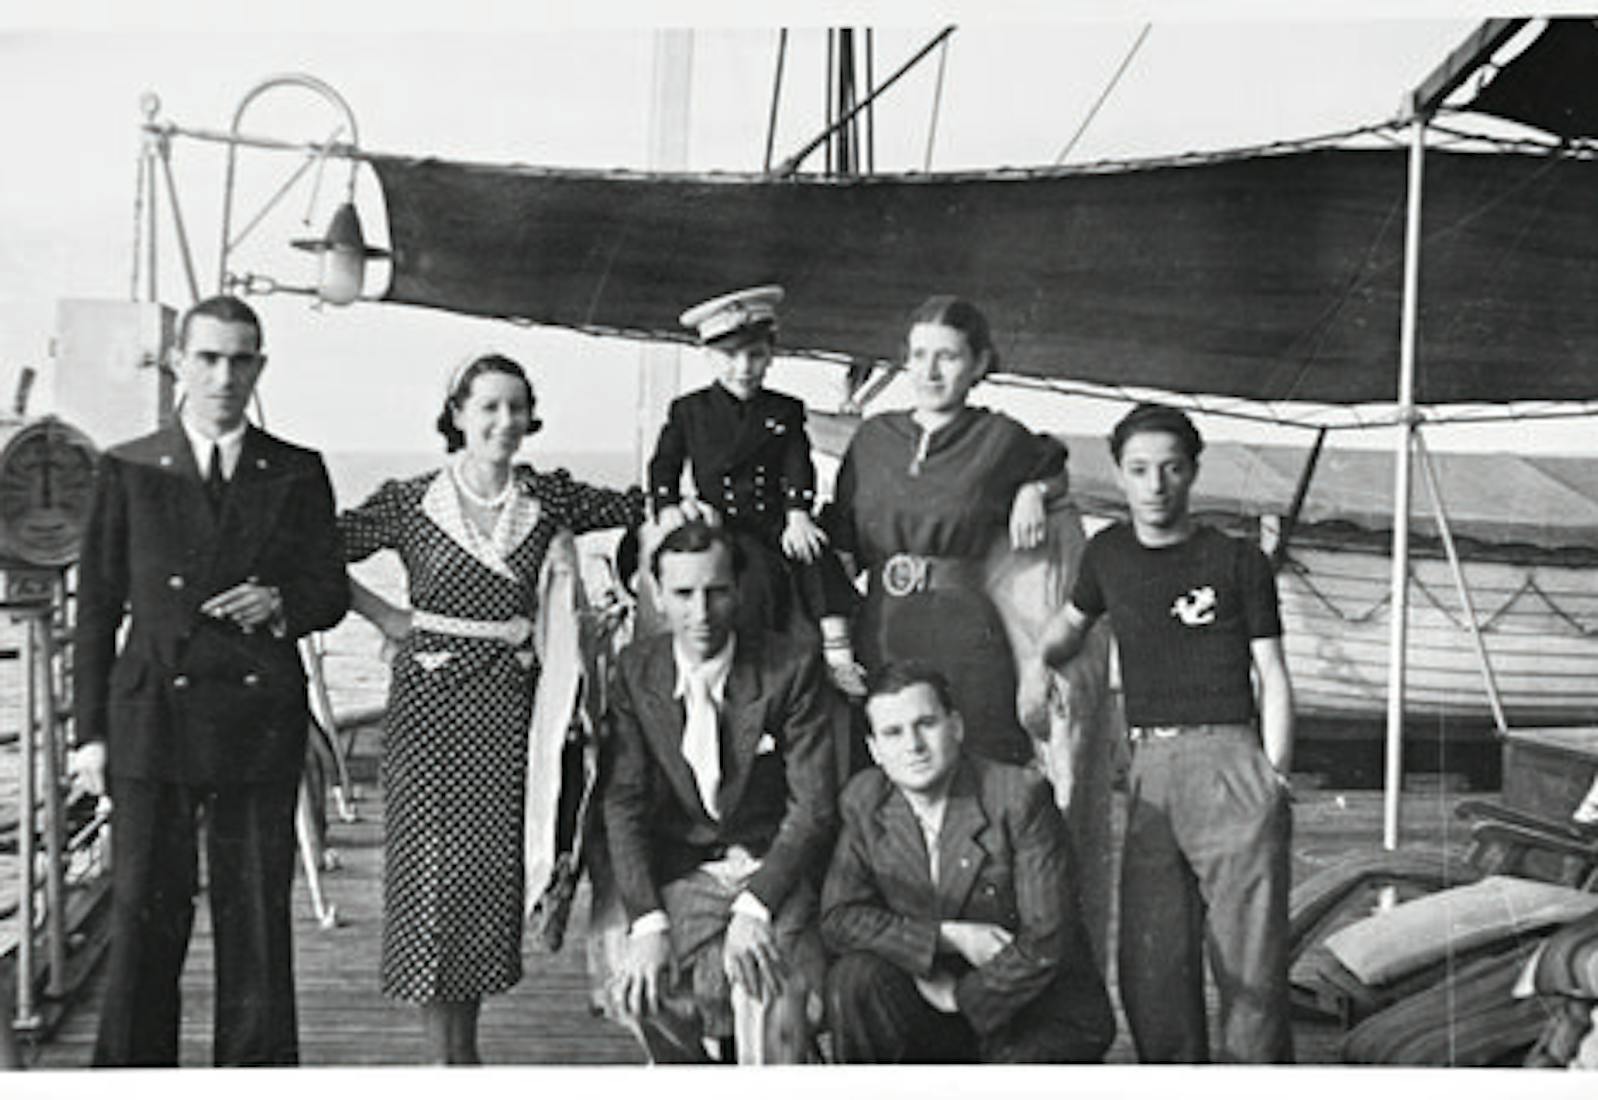 Stella's father Sam ( far right) and friends on a boat from Rhodes to Rhodesia, 1936.